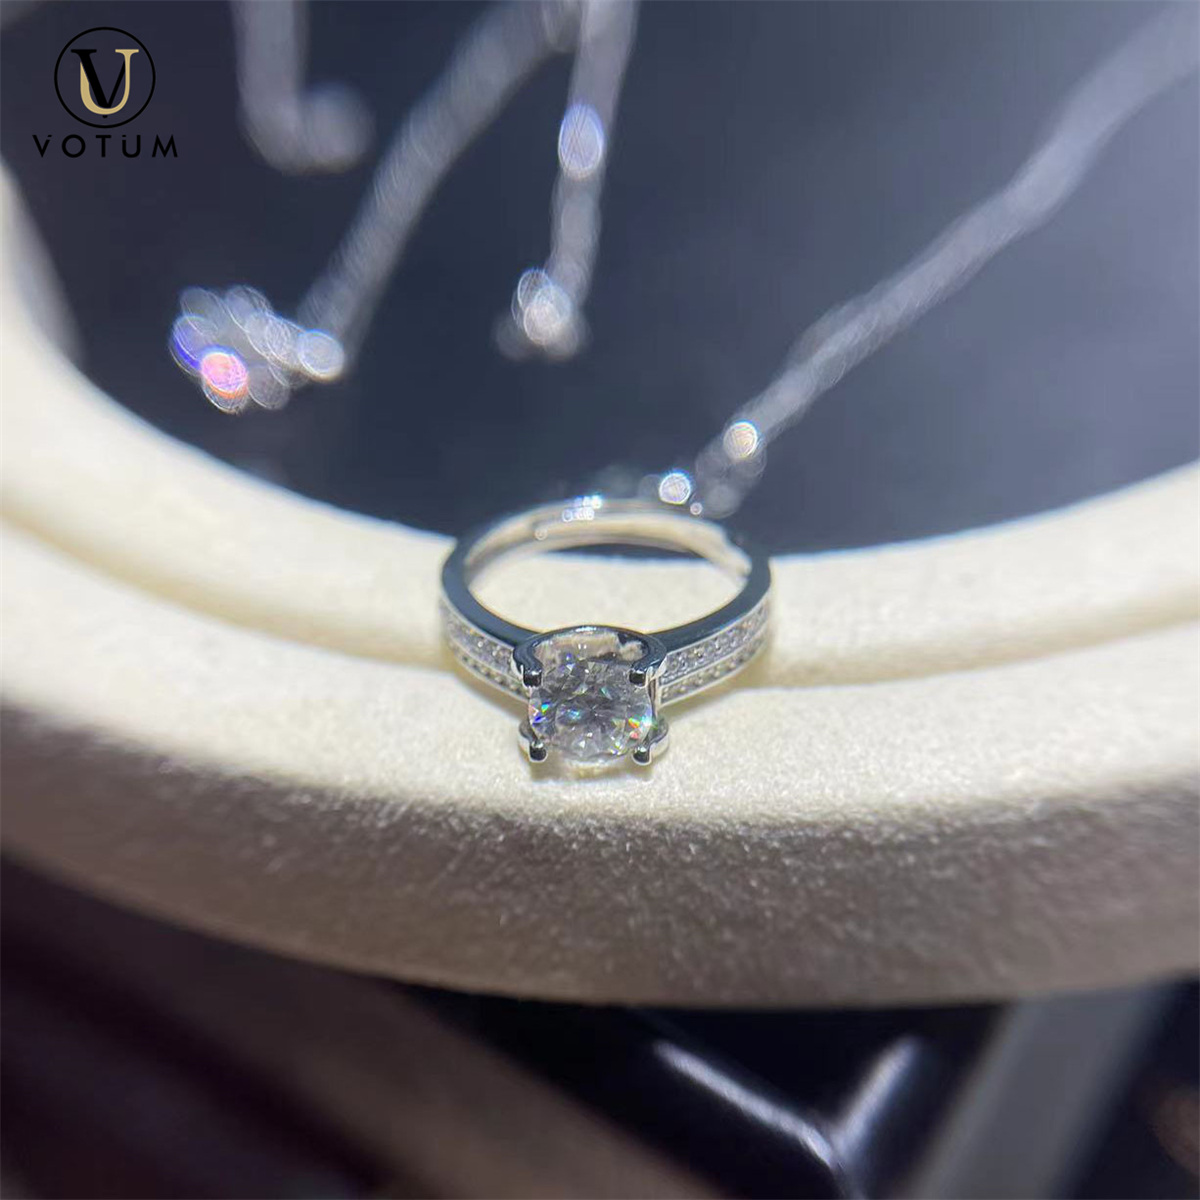 Votum Factory Wholesale 1carat Moissanite Sparking Diamond 925 Sterling Silver Ring with 18K Gold Plated Engagement Wedding Jewellery Accessories Fine Jewelry